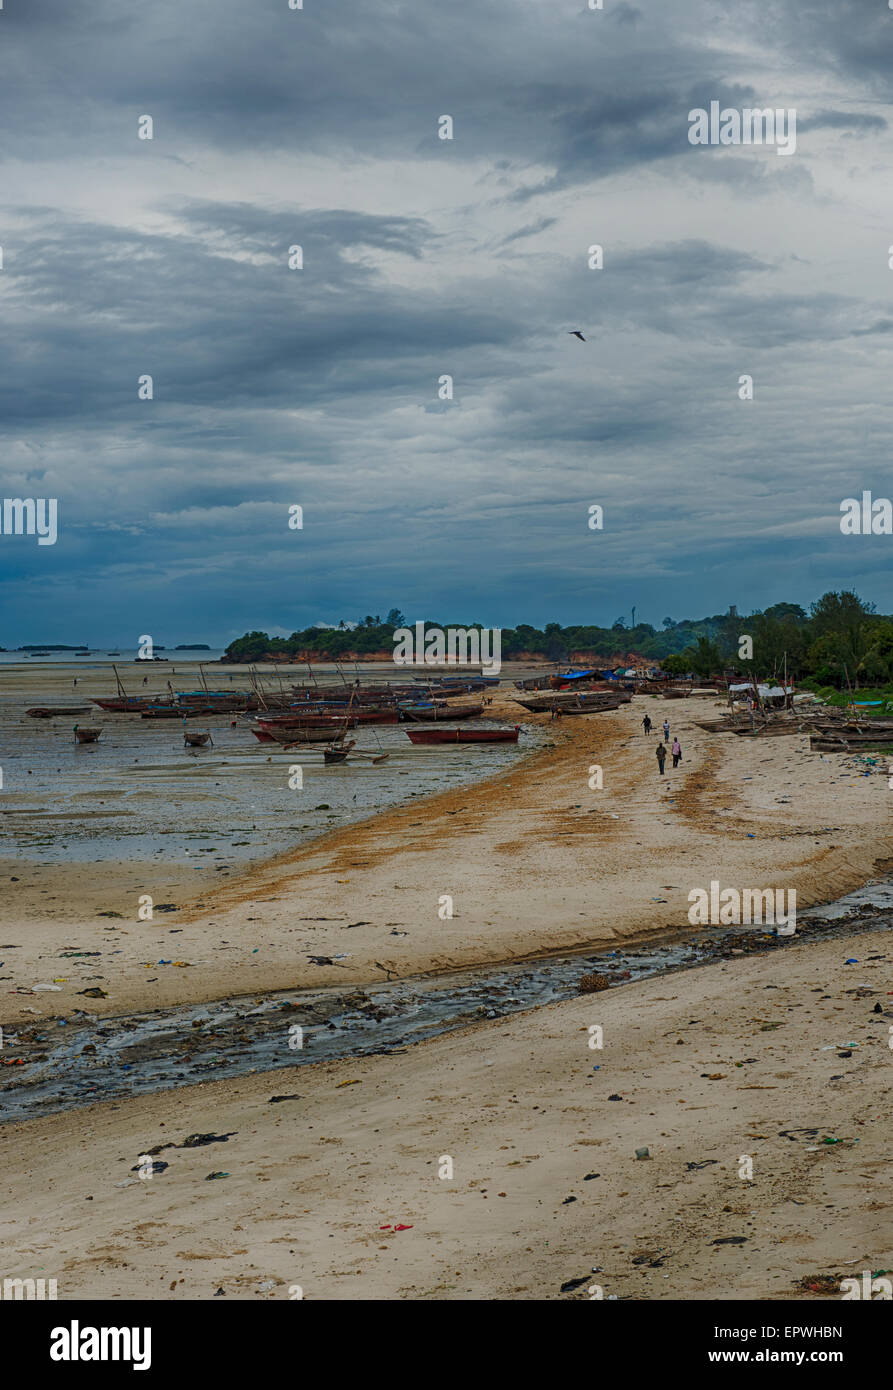 Sandy beach and fishing boats , Dar es Salaam, Tanzania, East Africa, storm clouds forming Stock Photo